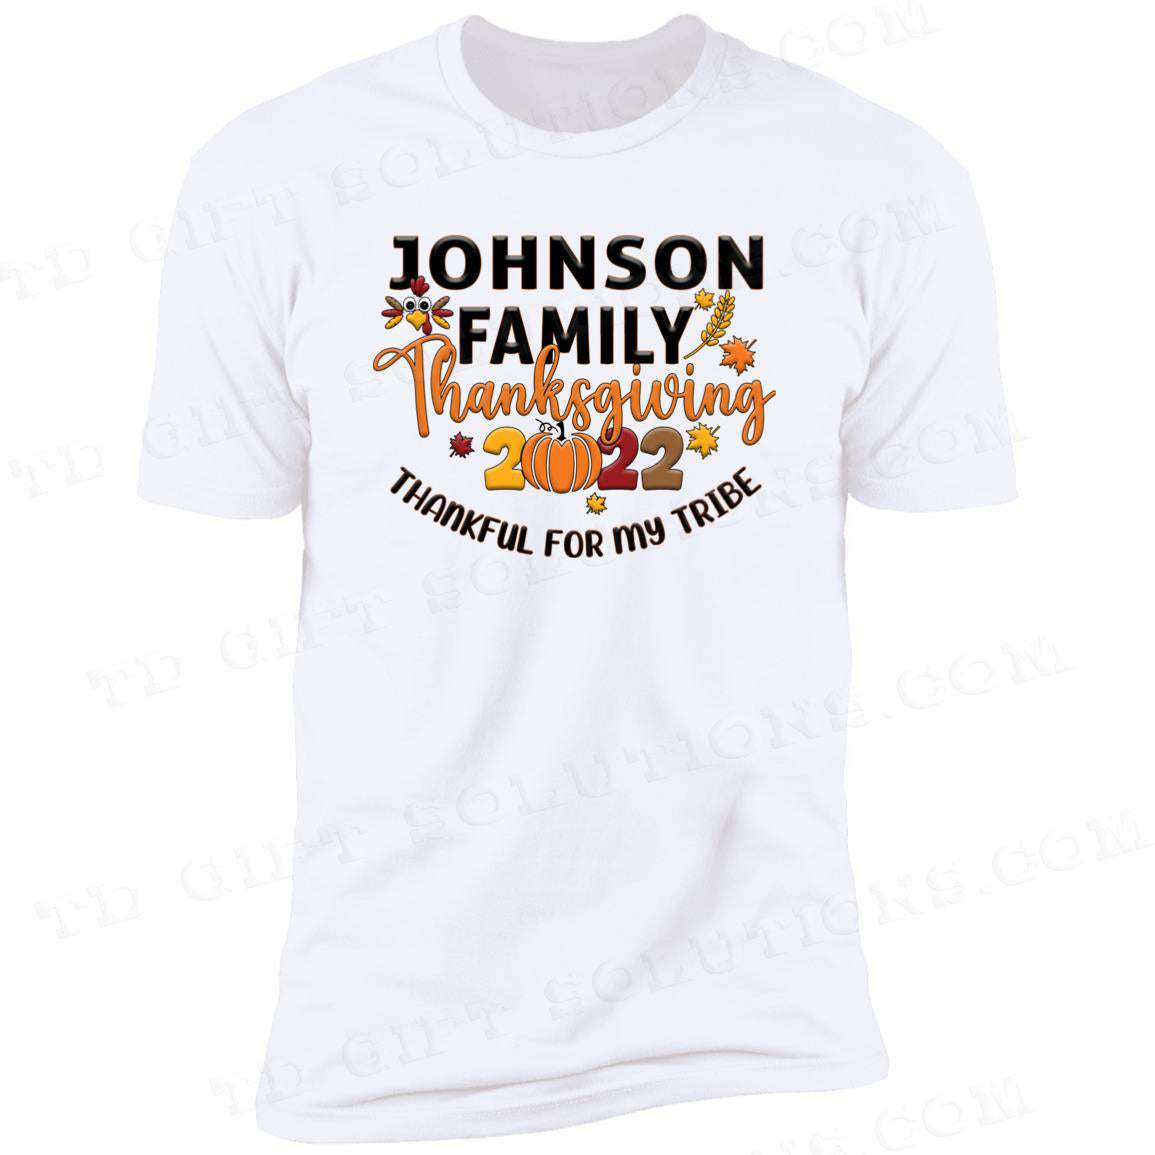 Personalized Matching Thankful For My Tribe Family T-Shirts-TD Gift Solutions.com